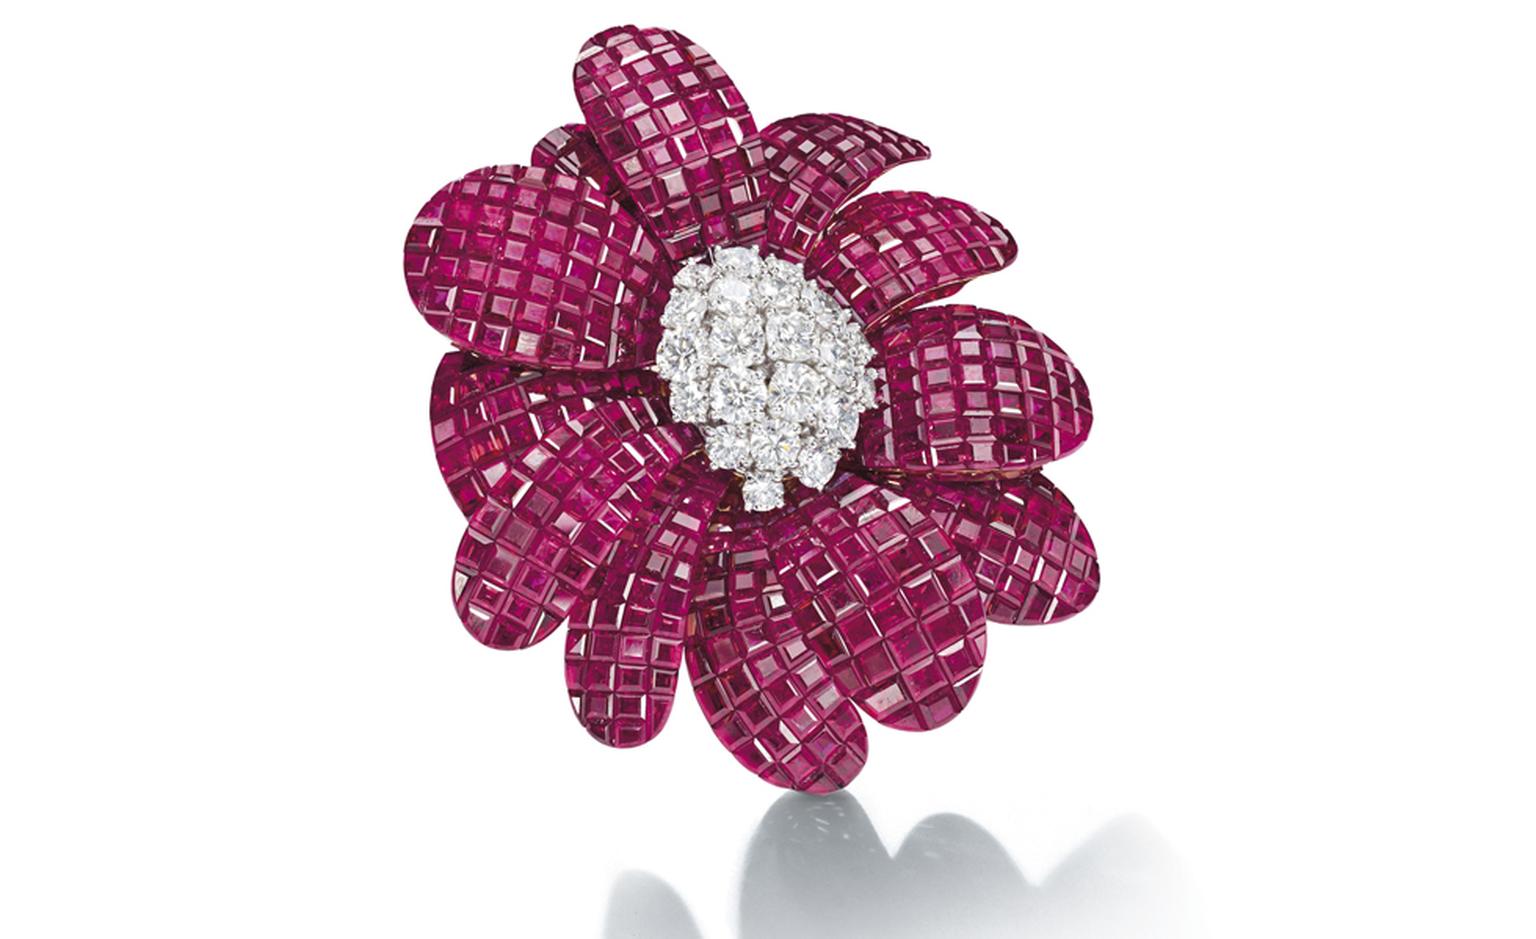 Lot 165. A ruby and diamond 'Cadix' Brooch, br Van Cleef & Arpels.Designed as a flowerhead, the mystery-set ruby petals centering on brilliant-cut diamond pistil mounted en tremblant, mounted in platinum and gold.  Estimate CHF 200,000 - CHF 300,000